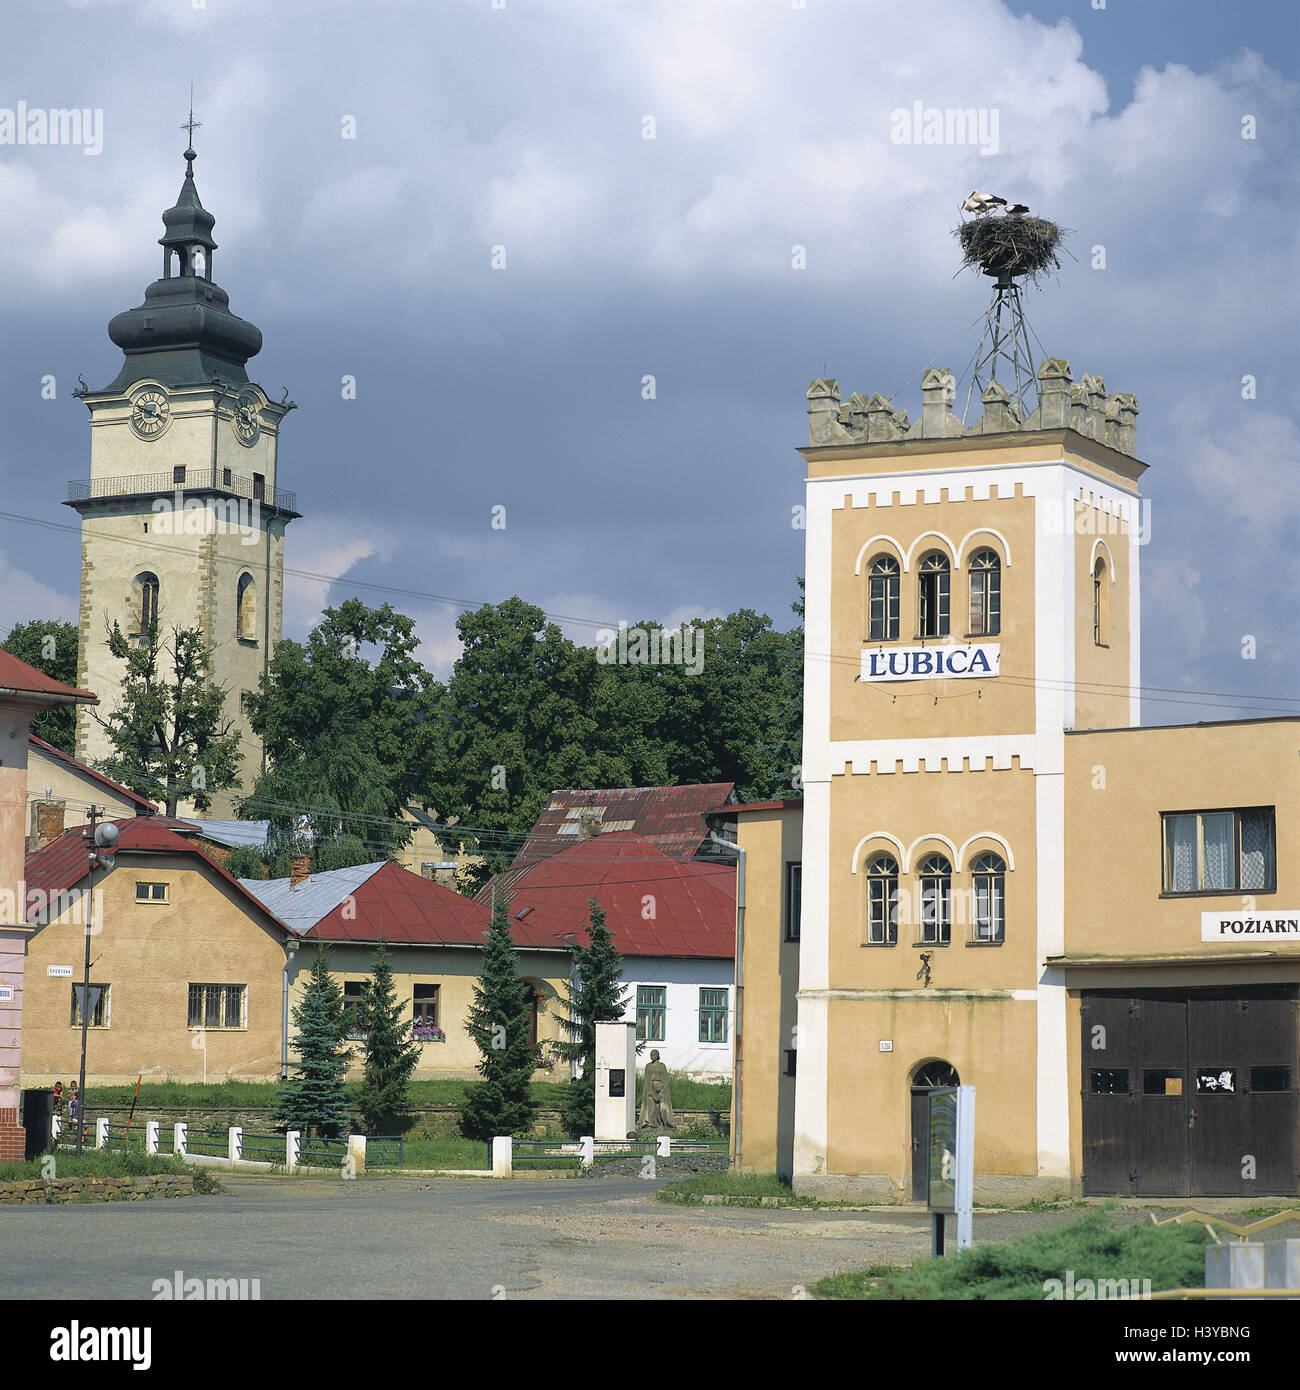 Slovakia, Lubica, local view, building, stork|s nest, Europe, place, Carpazi bianchi, centre, structure, white storks, Ciconia ciconia, Horst, birds, wild animals, Stelzvögel, birds passage, nesting place, outside, the Slovakian republic Stock Photo